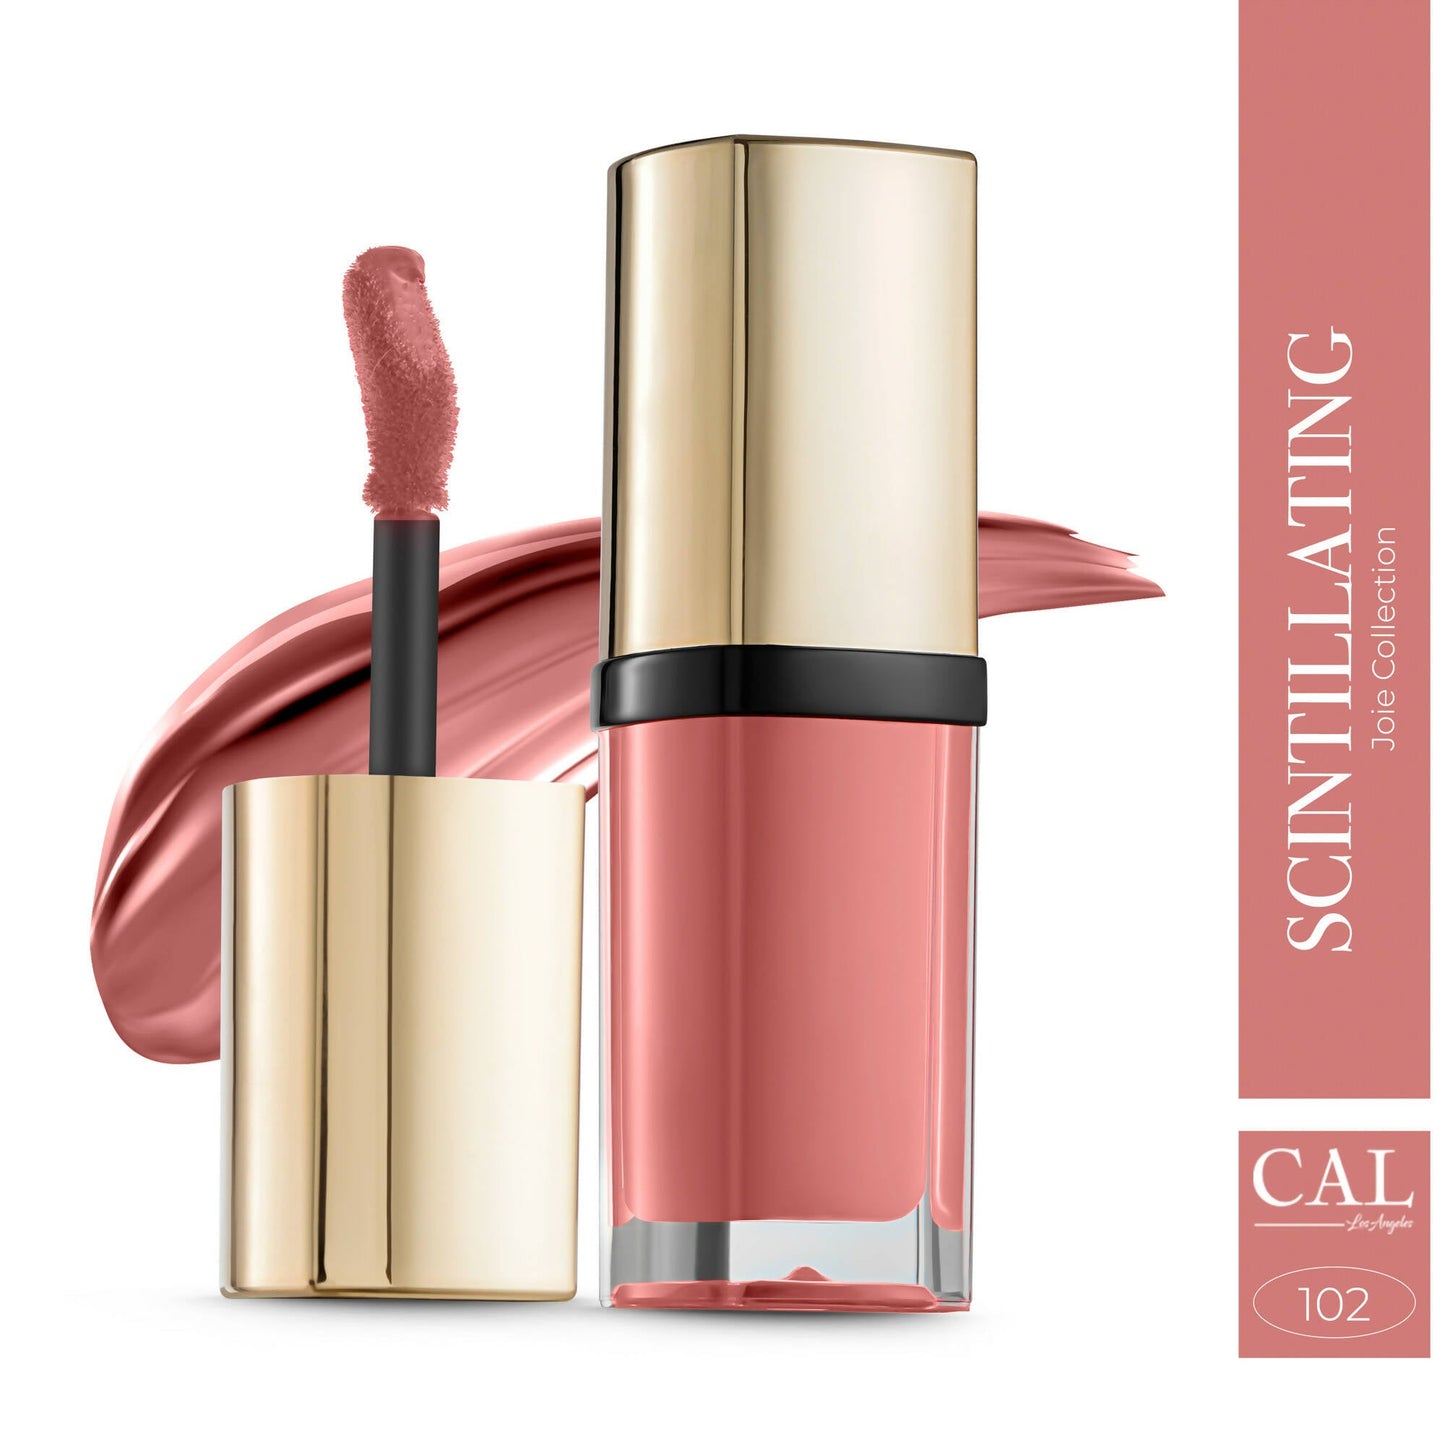 CAL Los Angeles Joie Collection Liquid Matte Peach Pink Lipstick - Scintillating 102